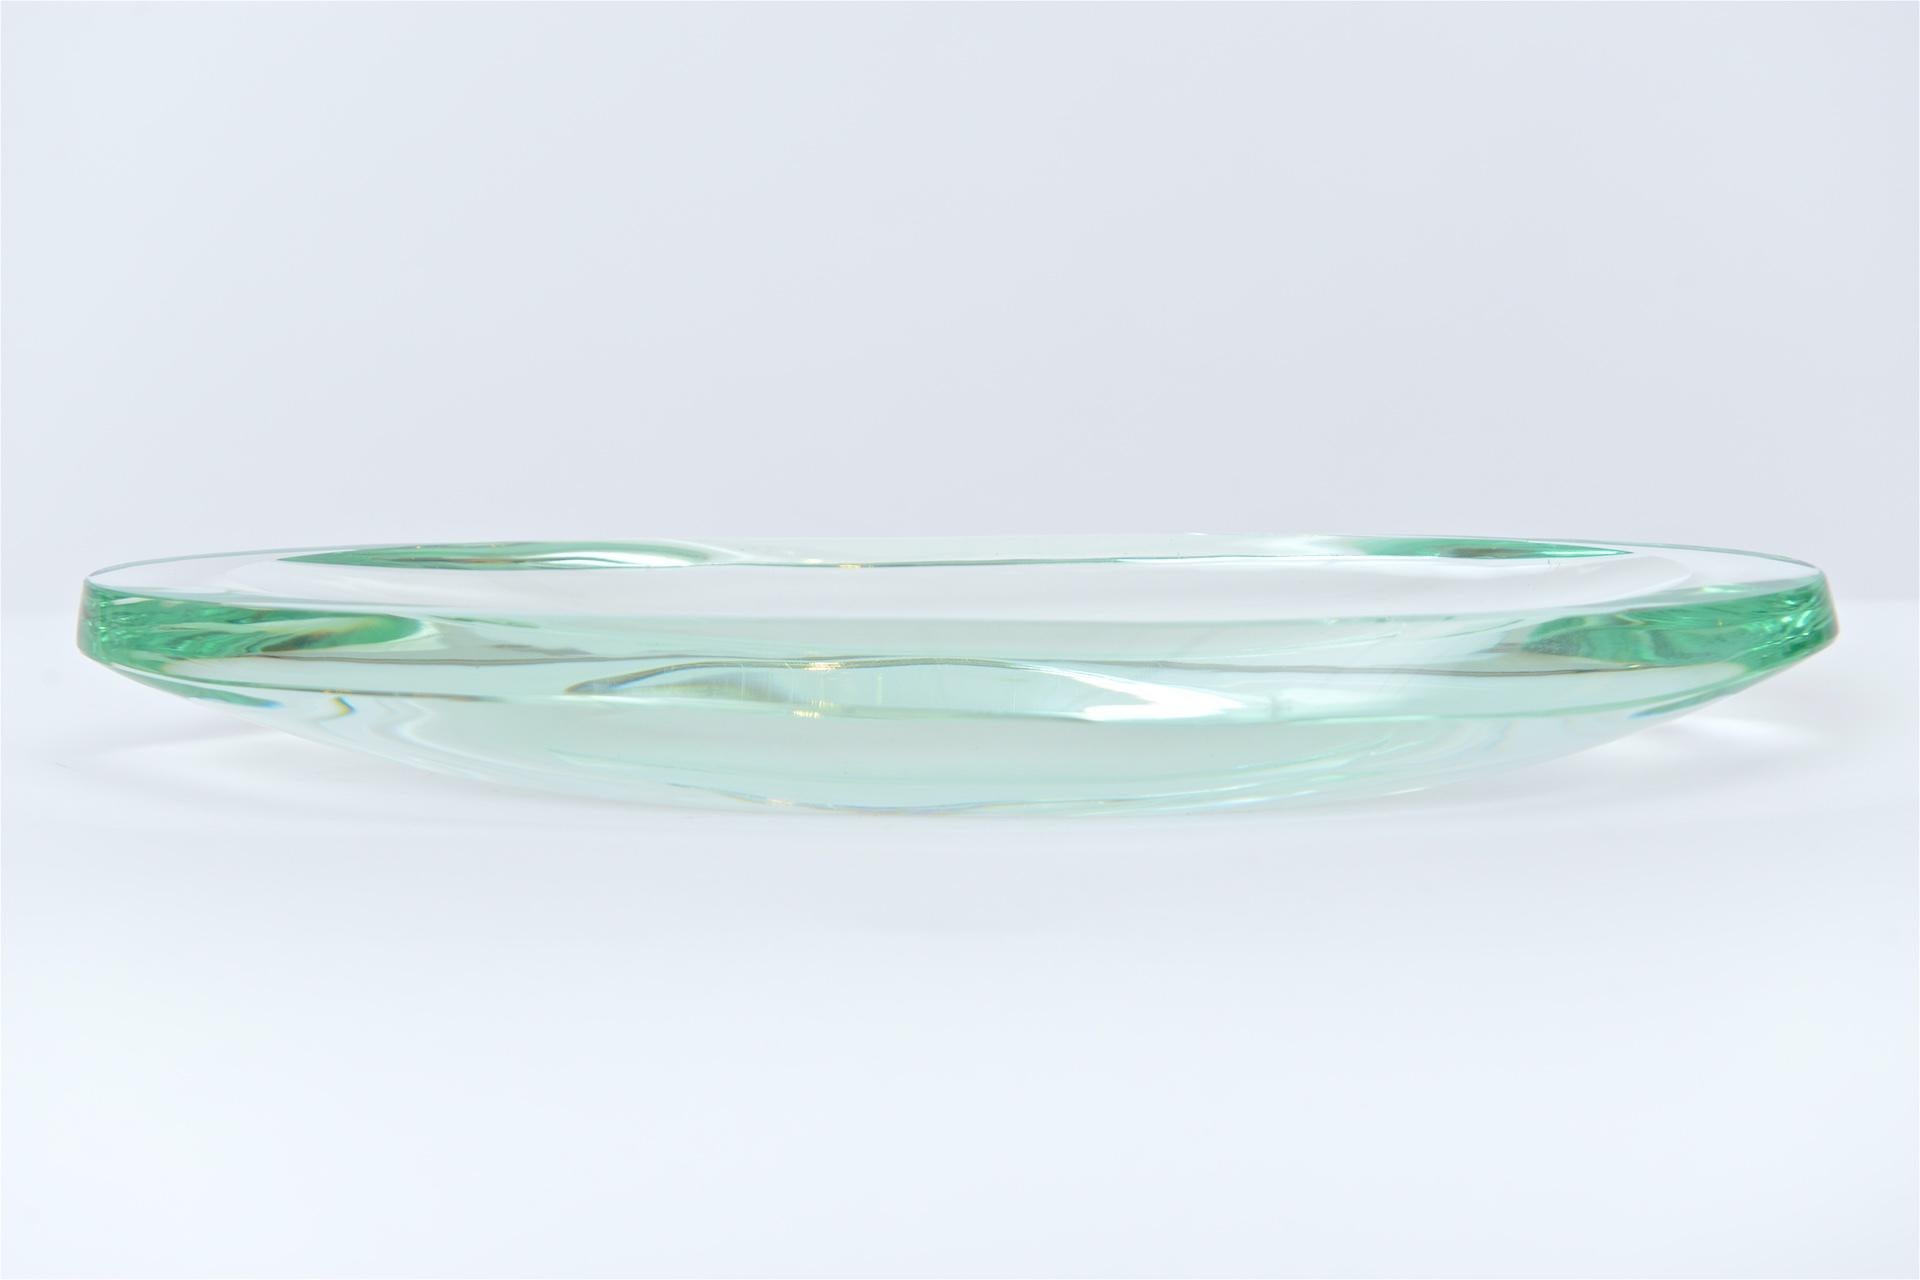 A beautiful glass centrepiece dish from one of the most prestigious Italian design companies, Fontana Arte. This elliptical shaped dish was produced in the 1950s and is a great example of the high quality materials used by the company at the time.